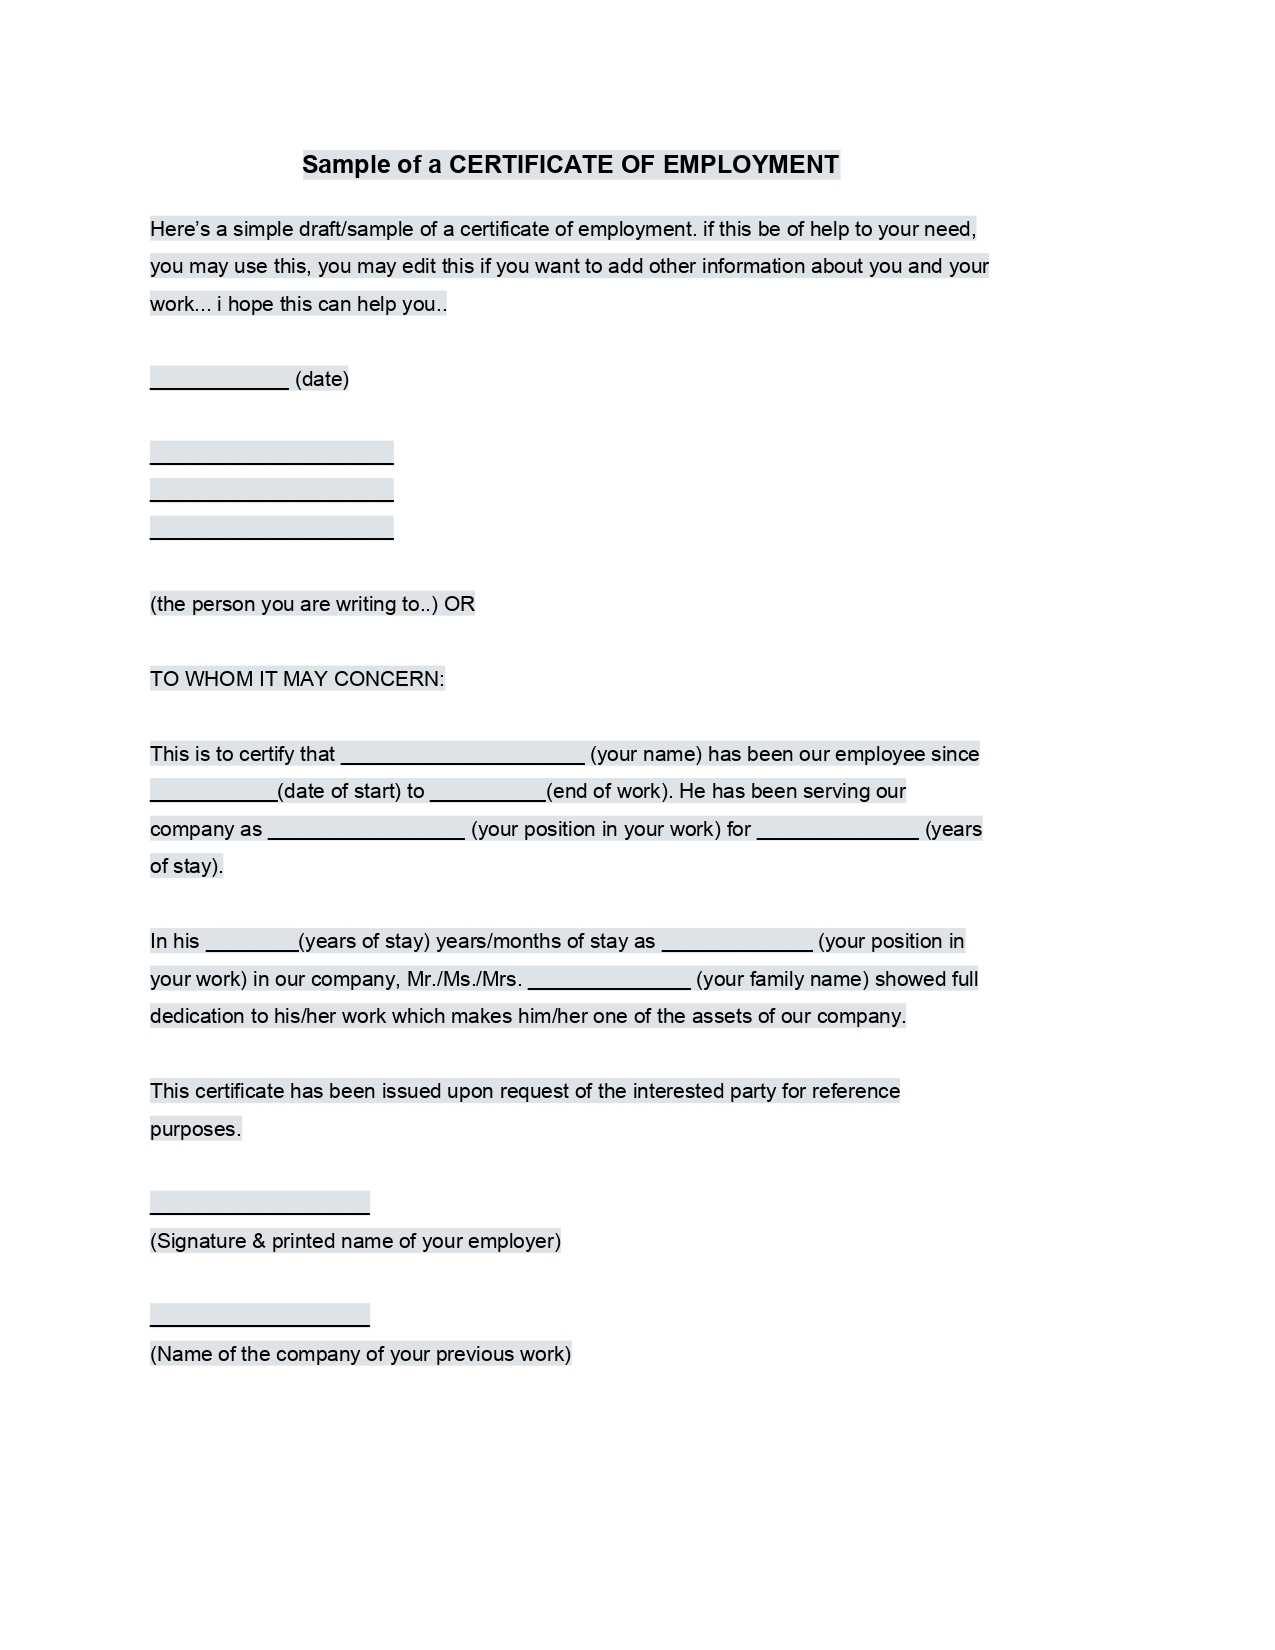 Sample Employment Certificate From Employer – Google Docs Throughout Sample Certificate Employment Template